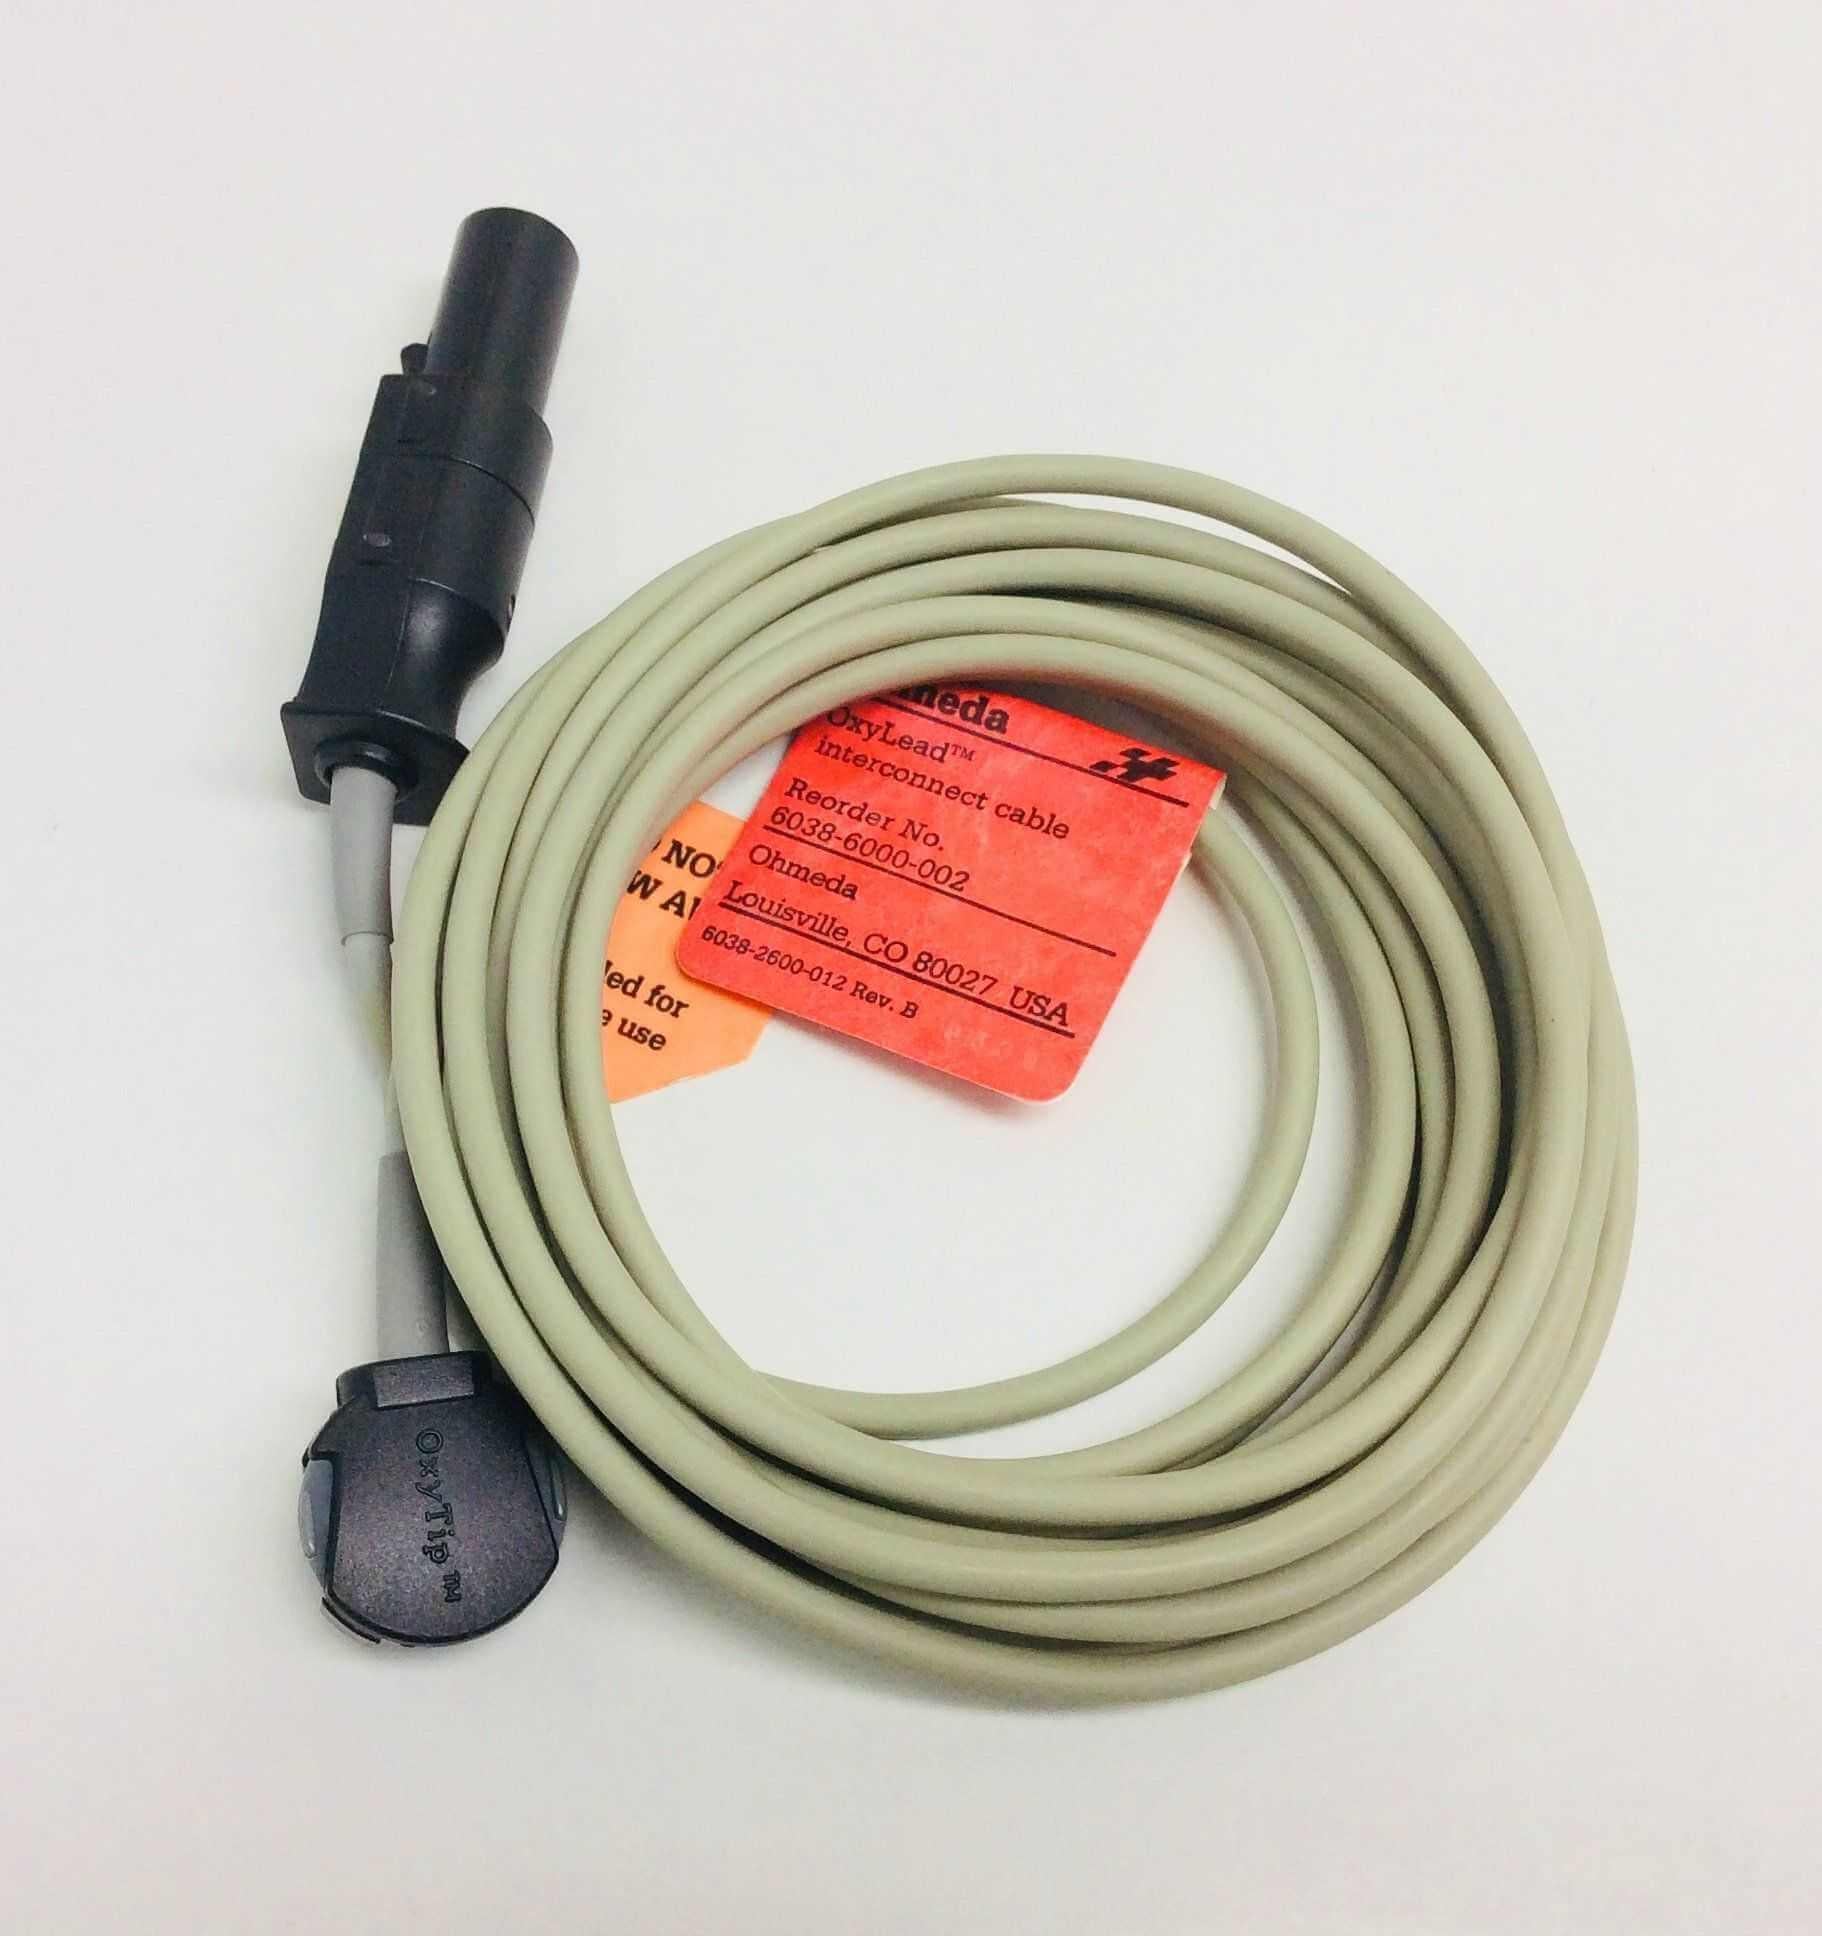 NEW Ohmeda Oxy Tip Oxylead Interconnect Cable 6038-6000-002 Warranty FREE Shipping - MBR Medicals